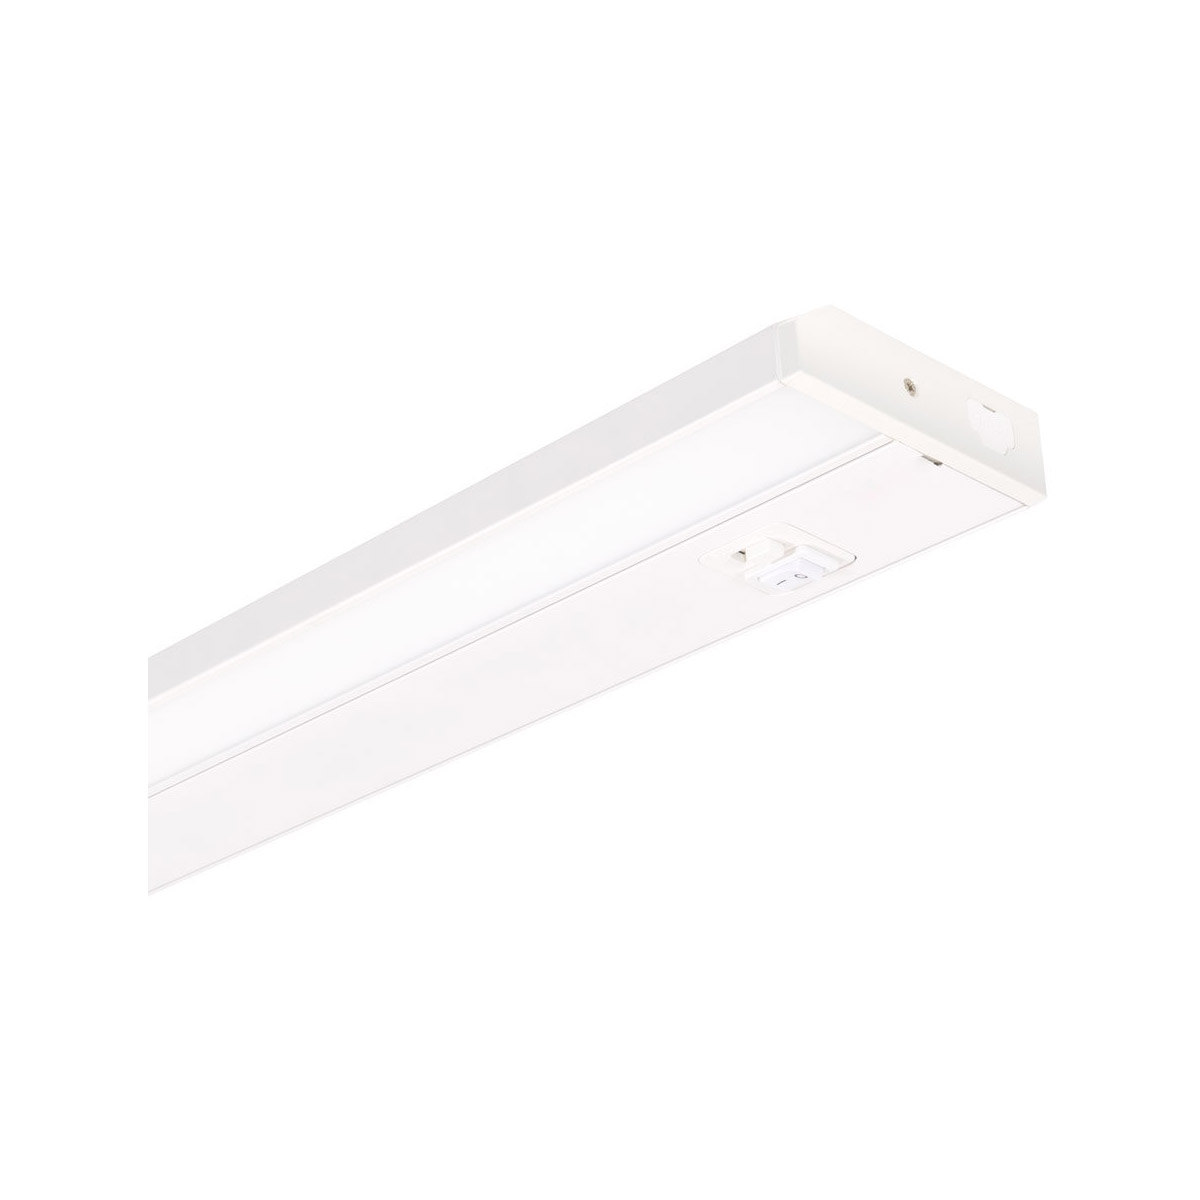 Picture of Jesco SG150-24-SWC-WH 24 in. 14W Shallow Profile LED Linkable Undercabinet Light with Adjustable Color Temperature, White